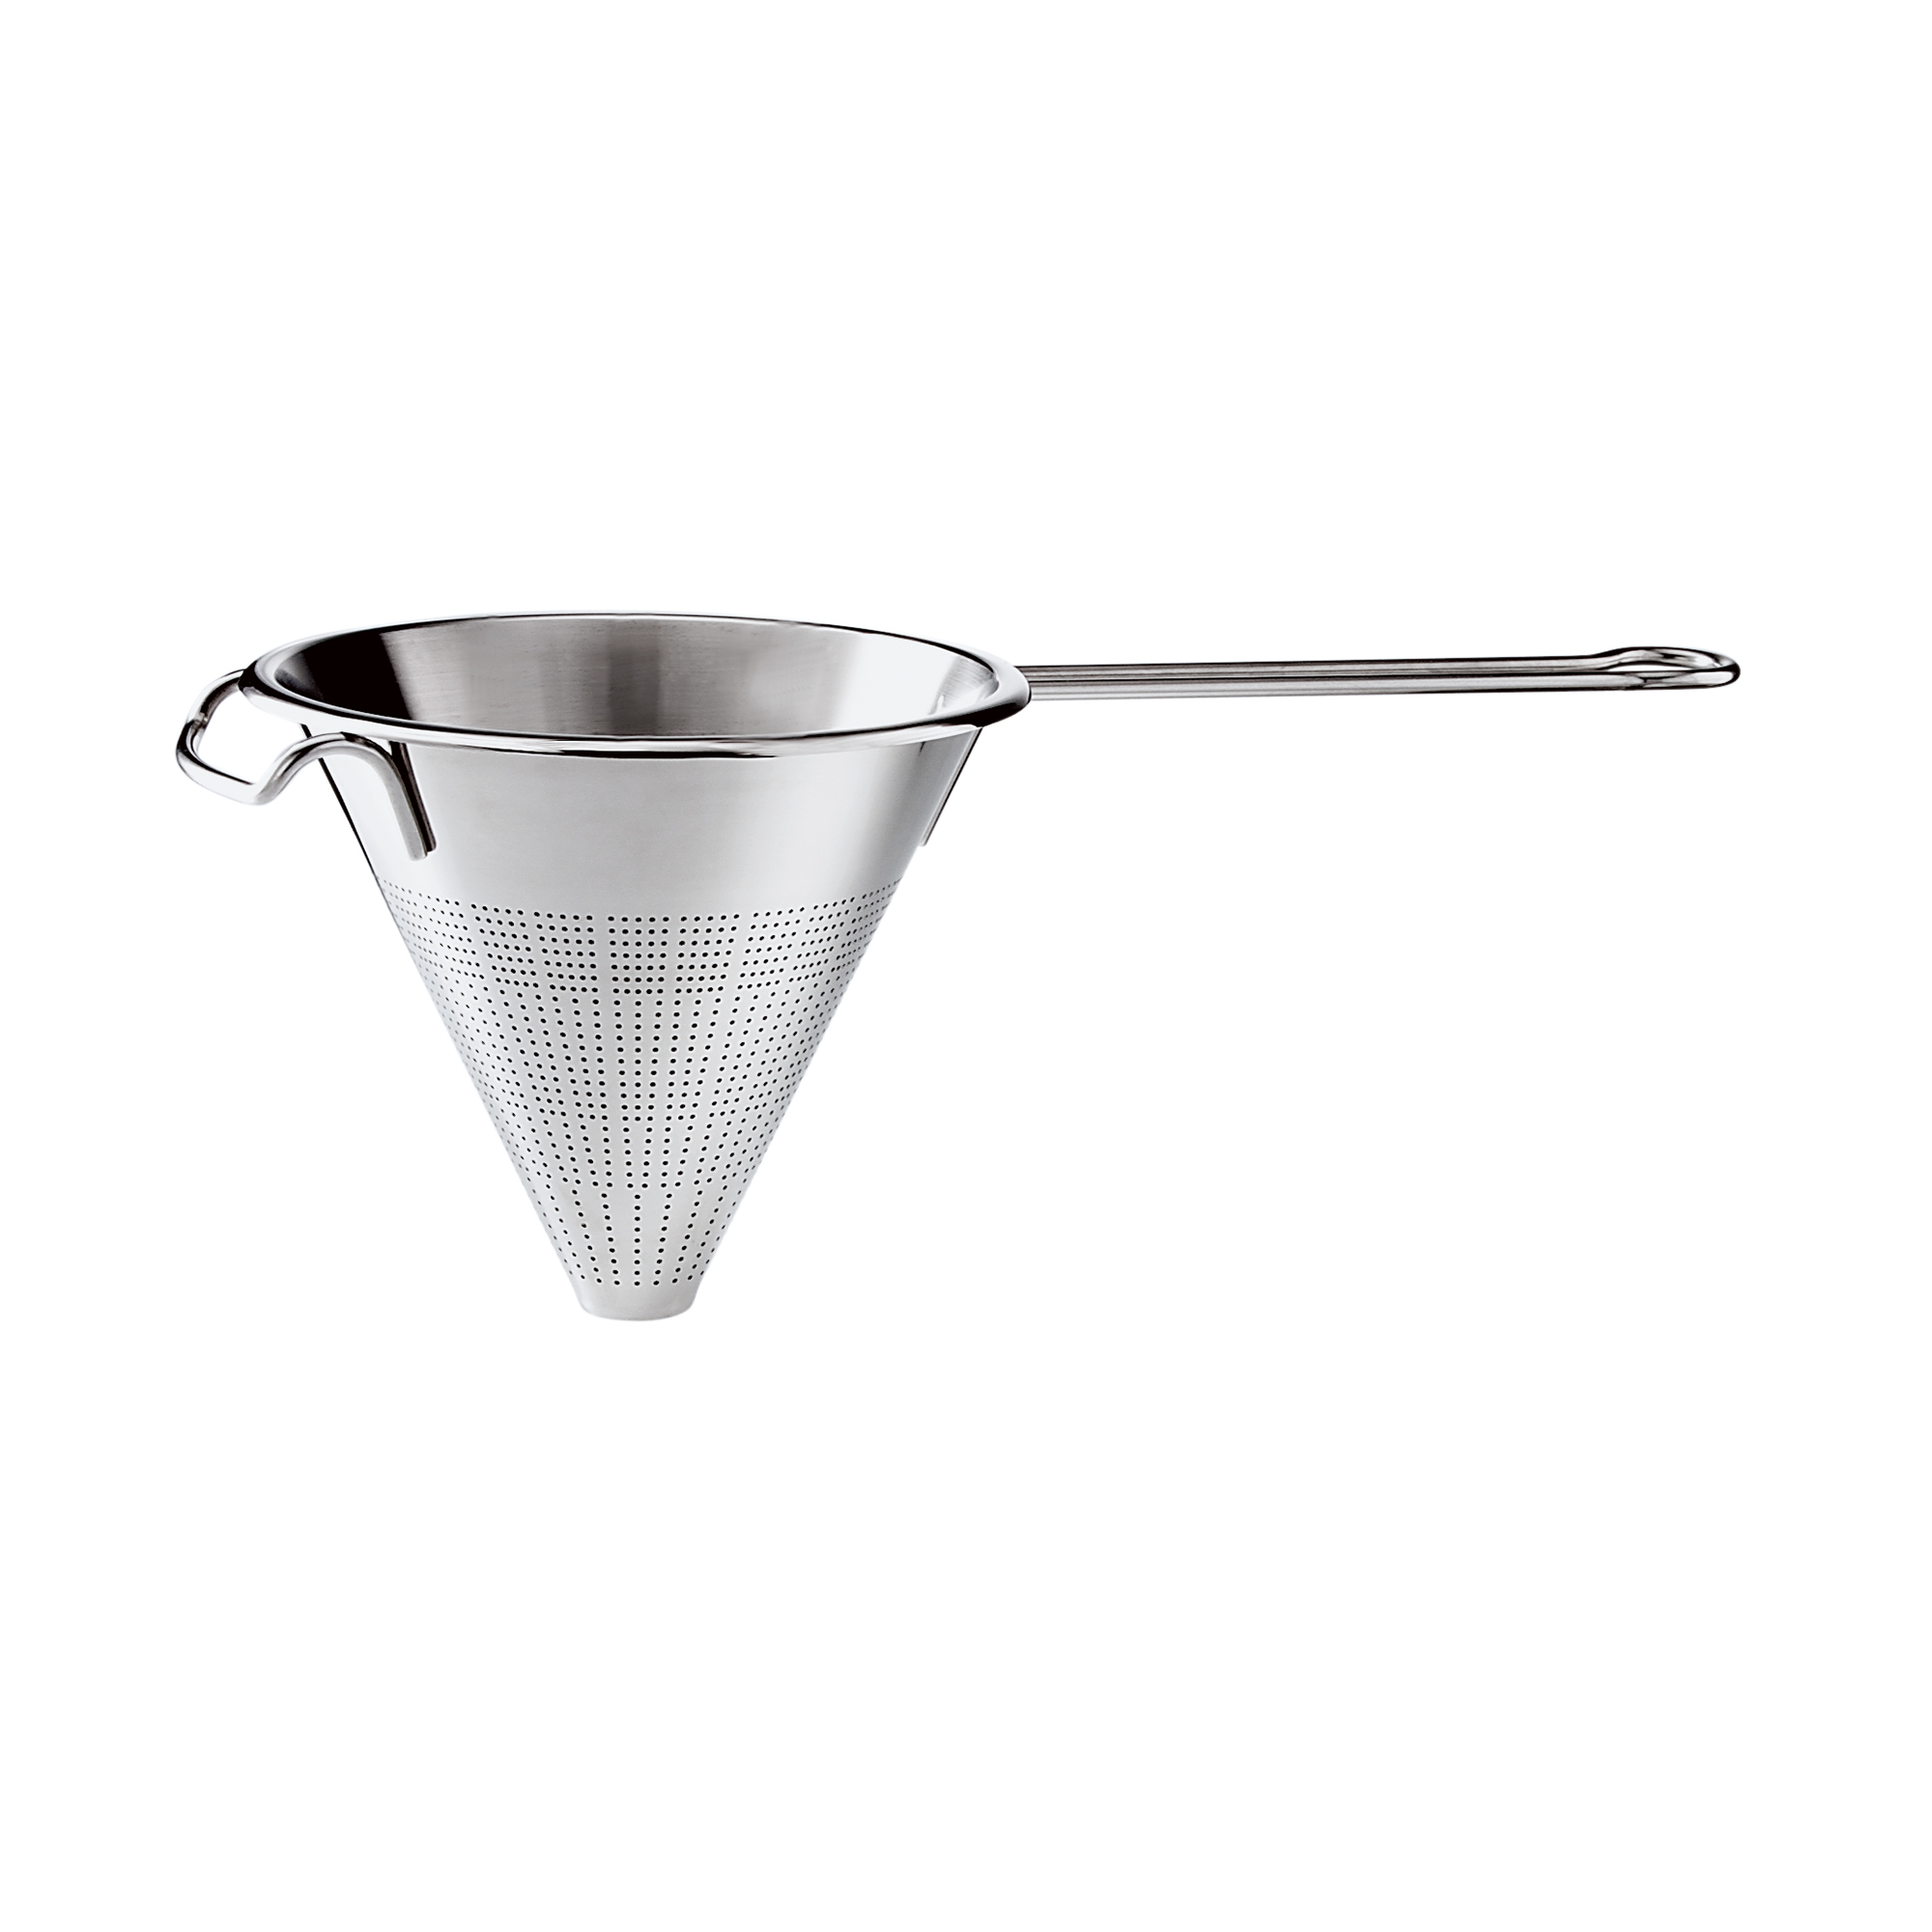 Conical Strainer Ø 18 cm|7.1 in.